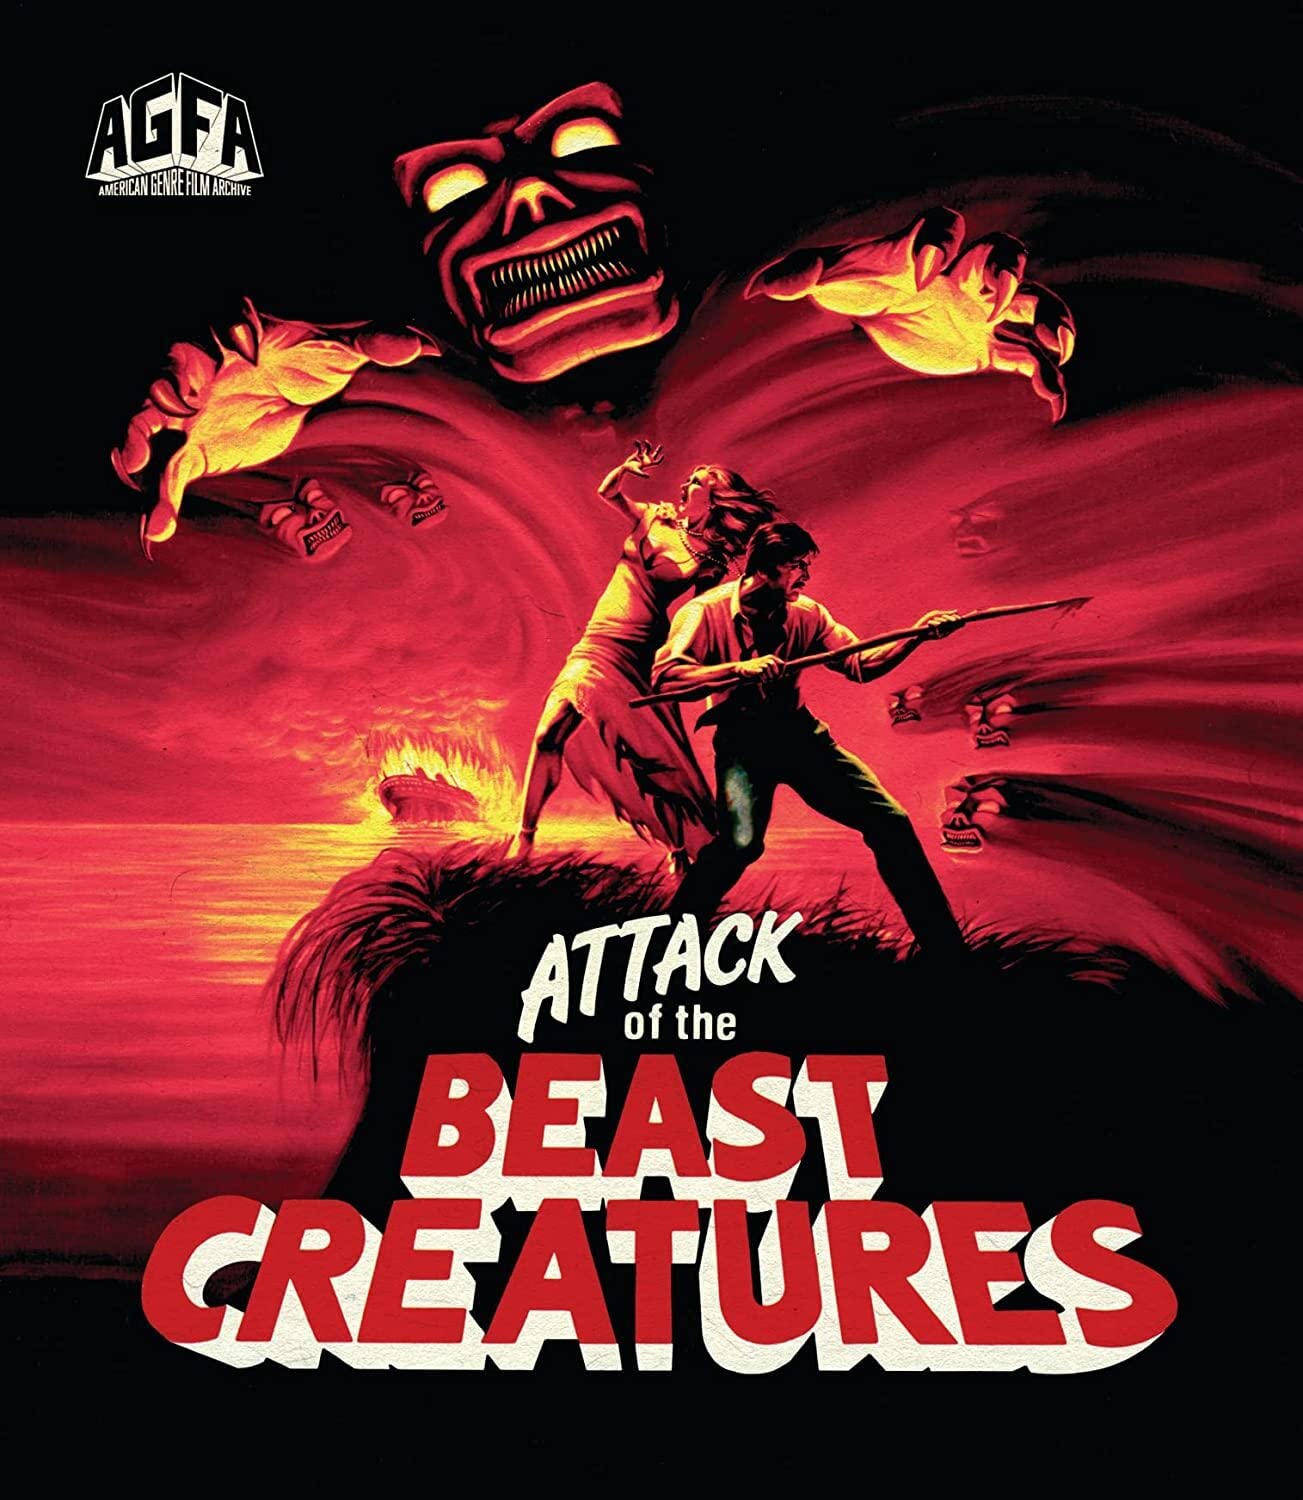 Attack Of The Beast Creatures - Darkside Records